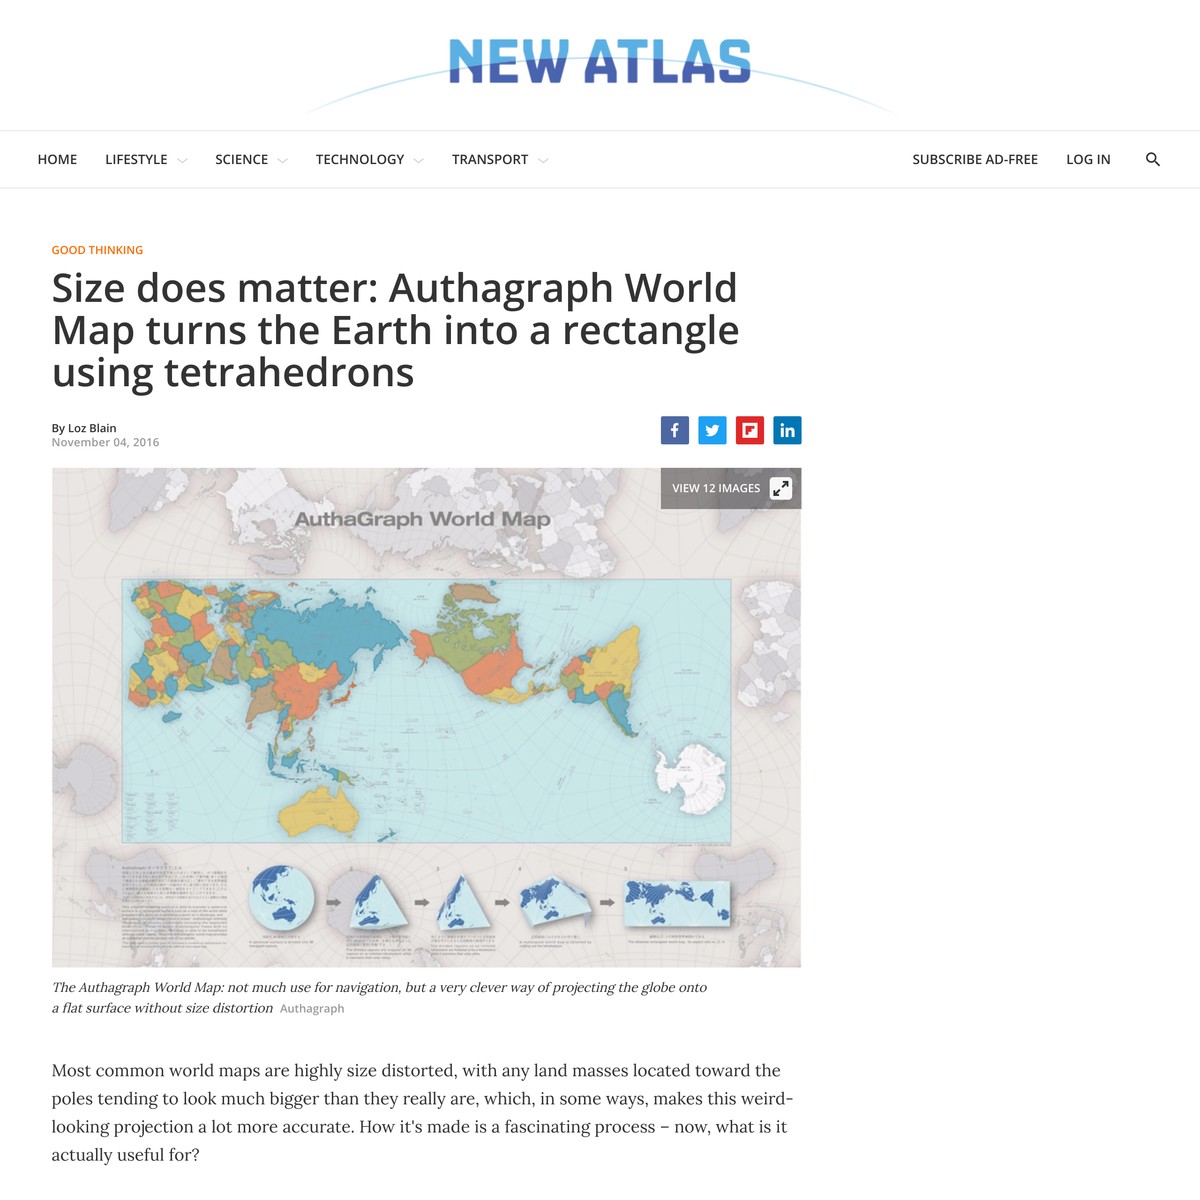 Size does matter: Authagraph World Map turns the Earth into a rectangle